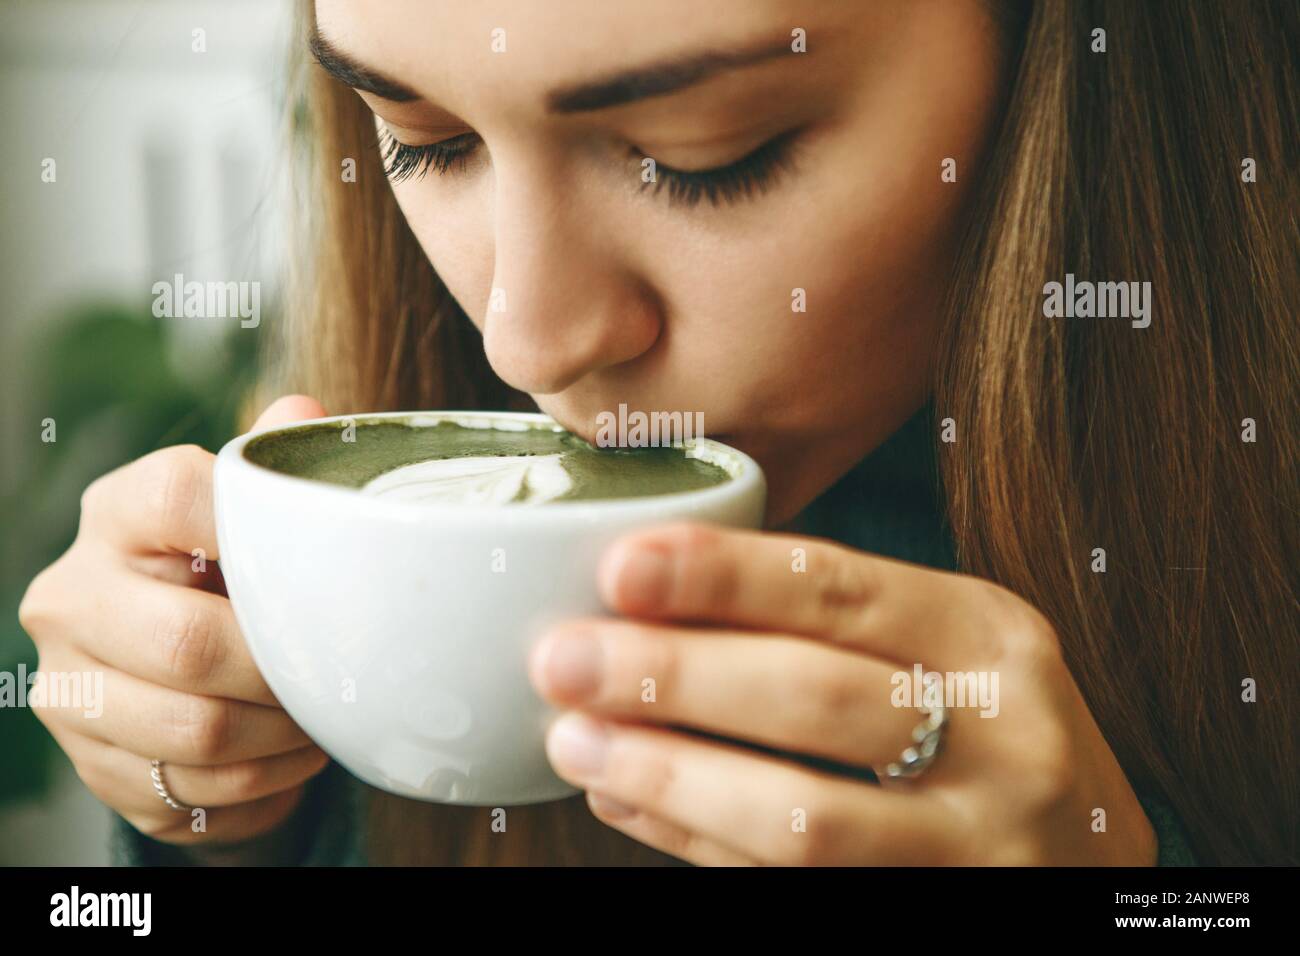 Close-up face or portrait of a girl who drinks healthy and delicious green matcha latte tea Stock Photo